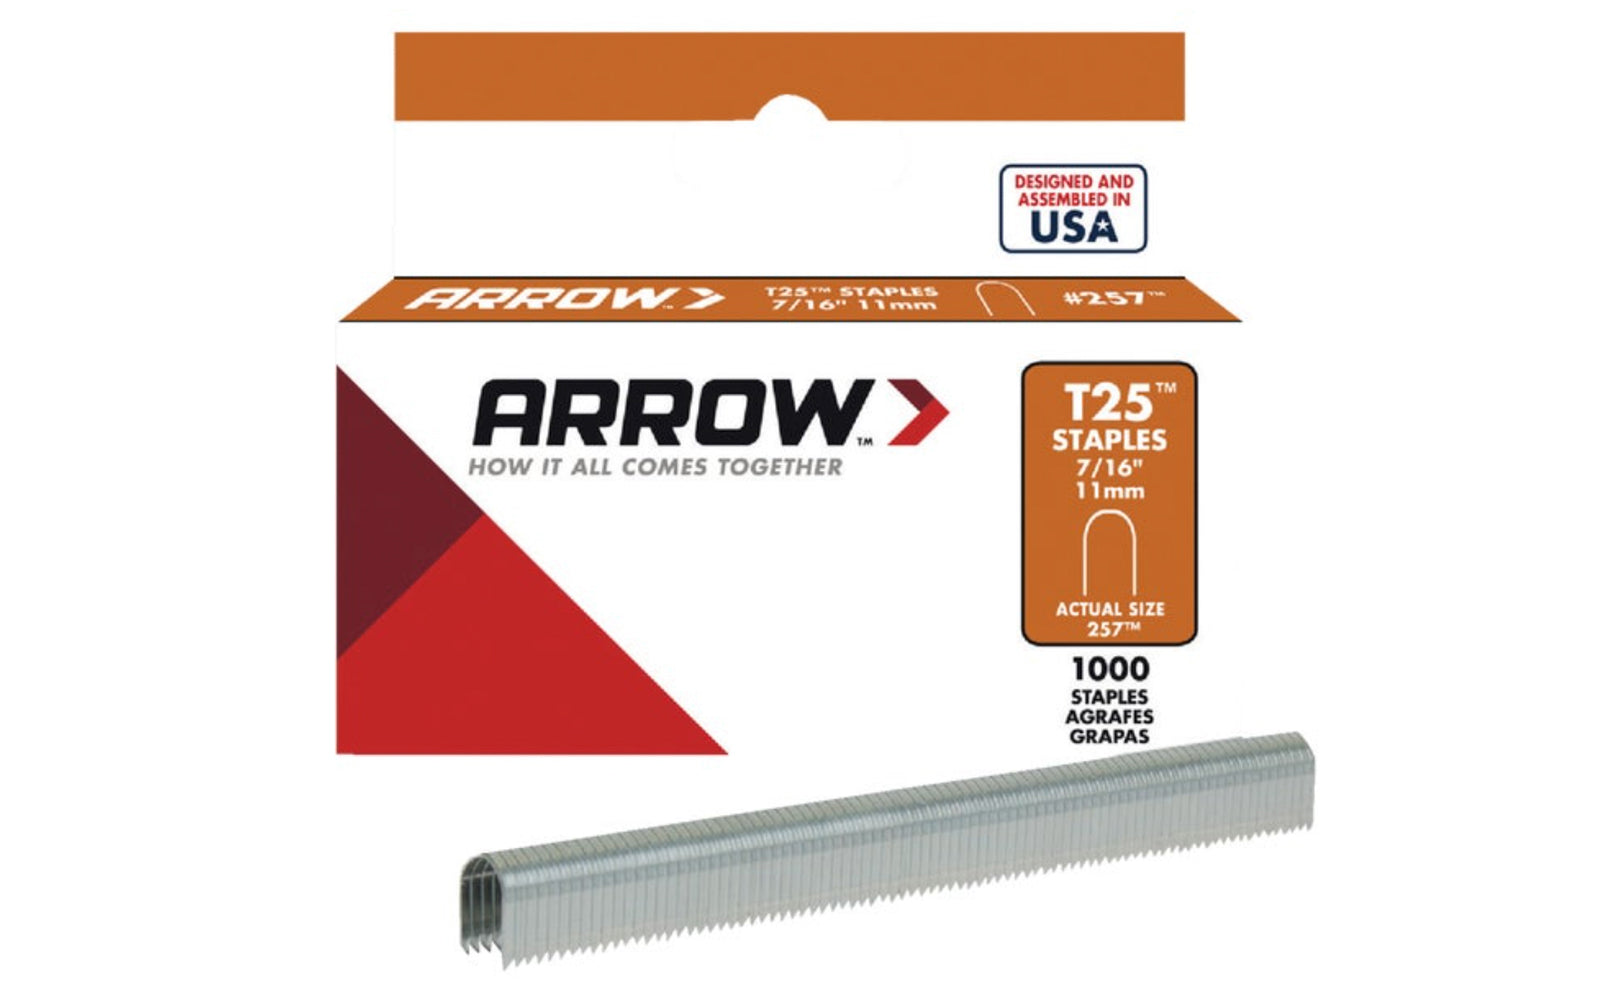 Arrow T25 Round Crown Cable 7/16" Staples - 1000 PK. Fits wire up to 1/4" diameter. Good for CAT 5, Telephone Wiring, Speaker Wire.  Designed & assembled in USA. 079055257165